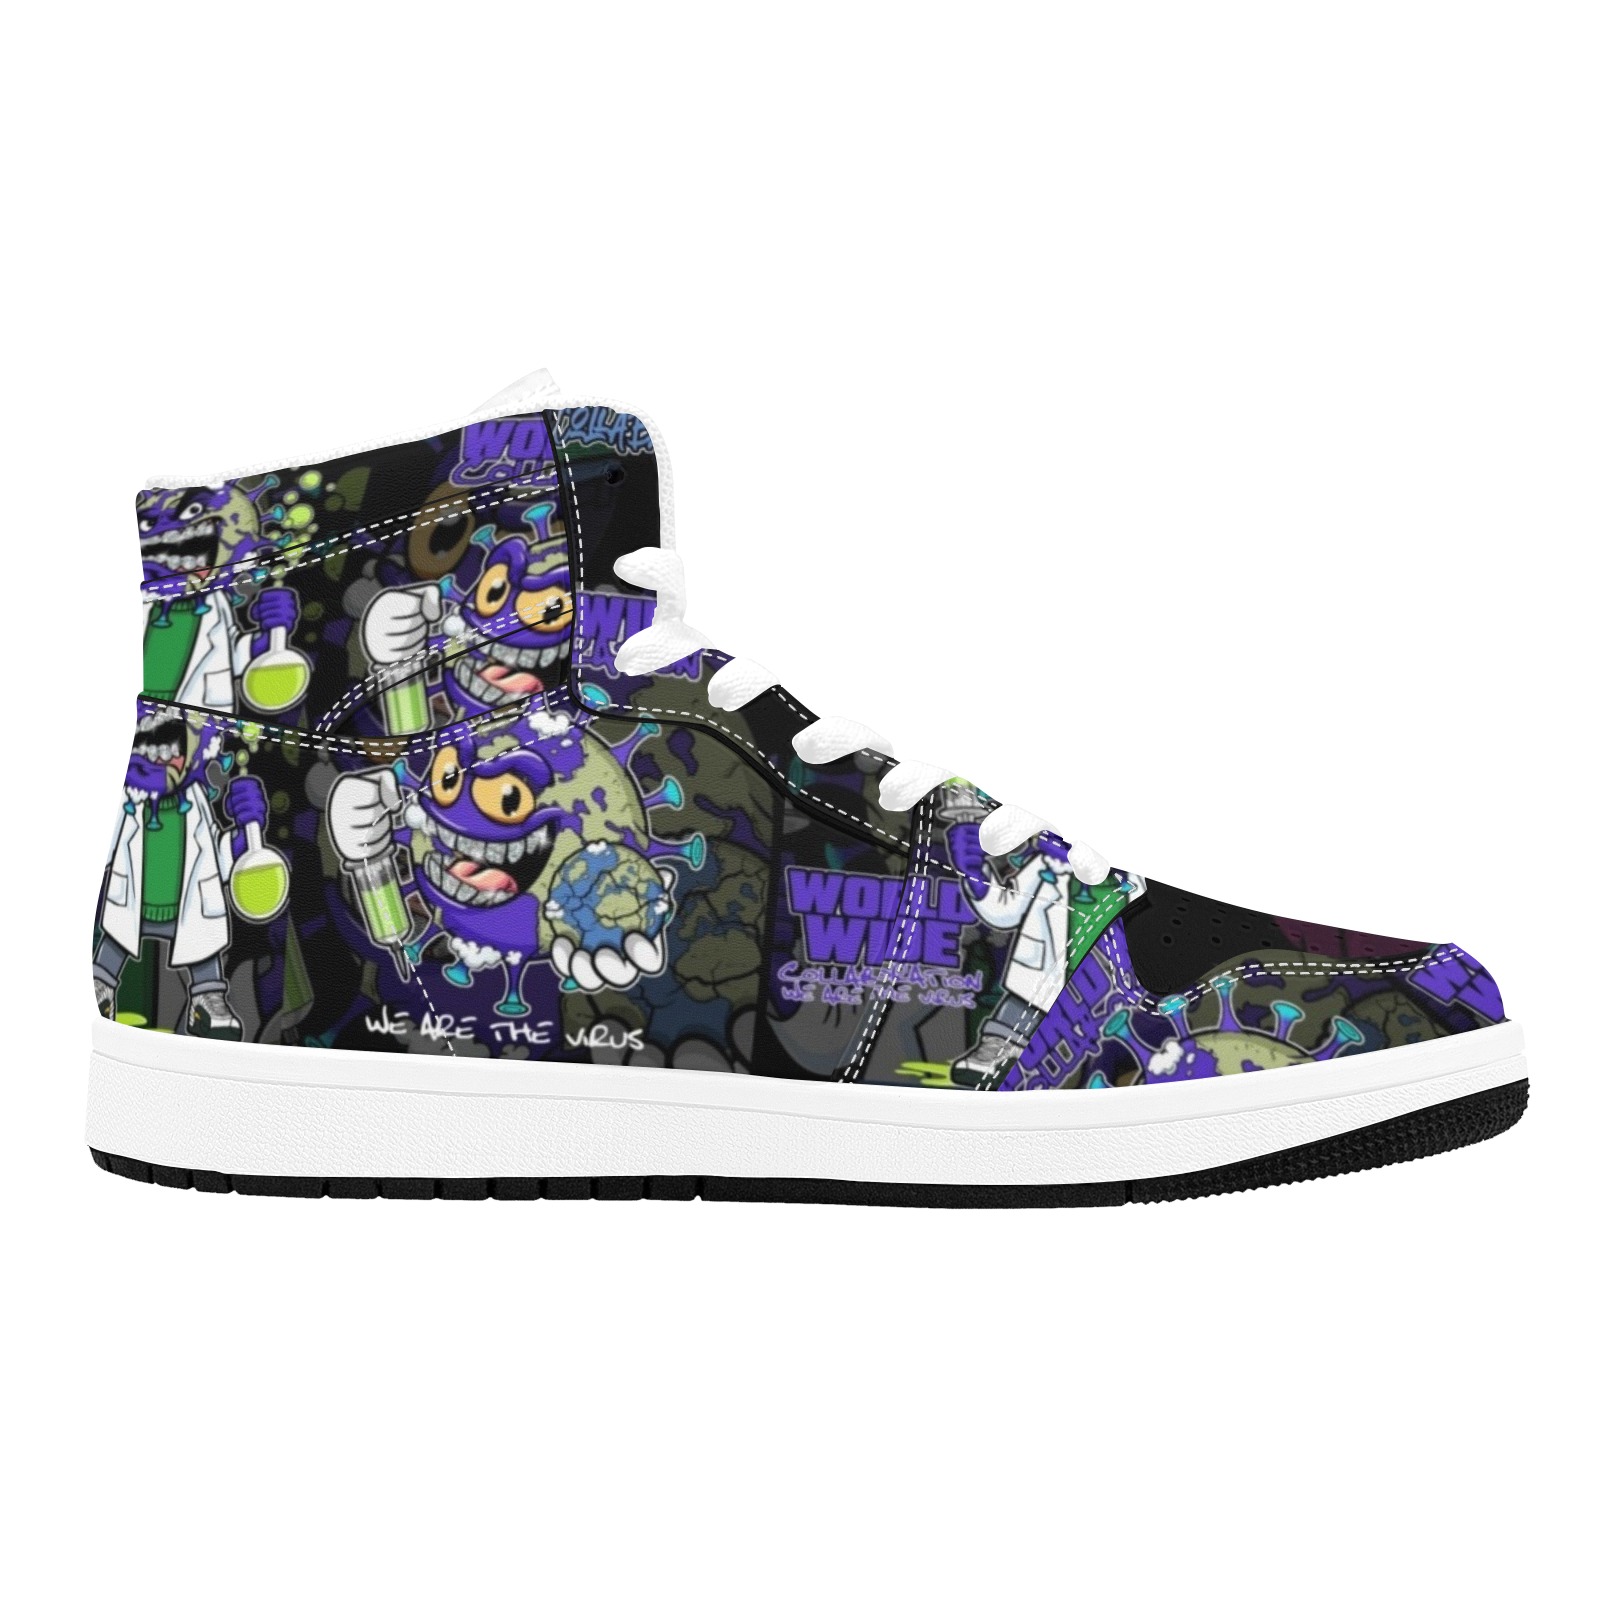 wwcfam all over print shoes Men's High Top Sneakers (Model 20042)